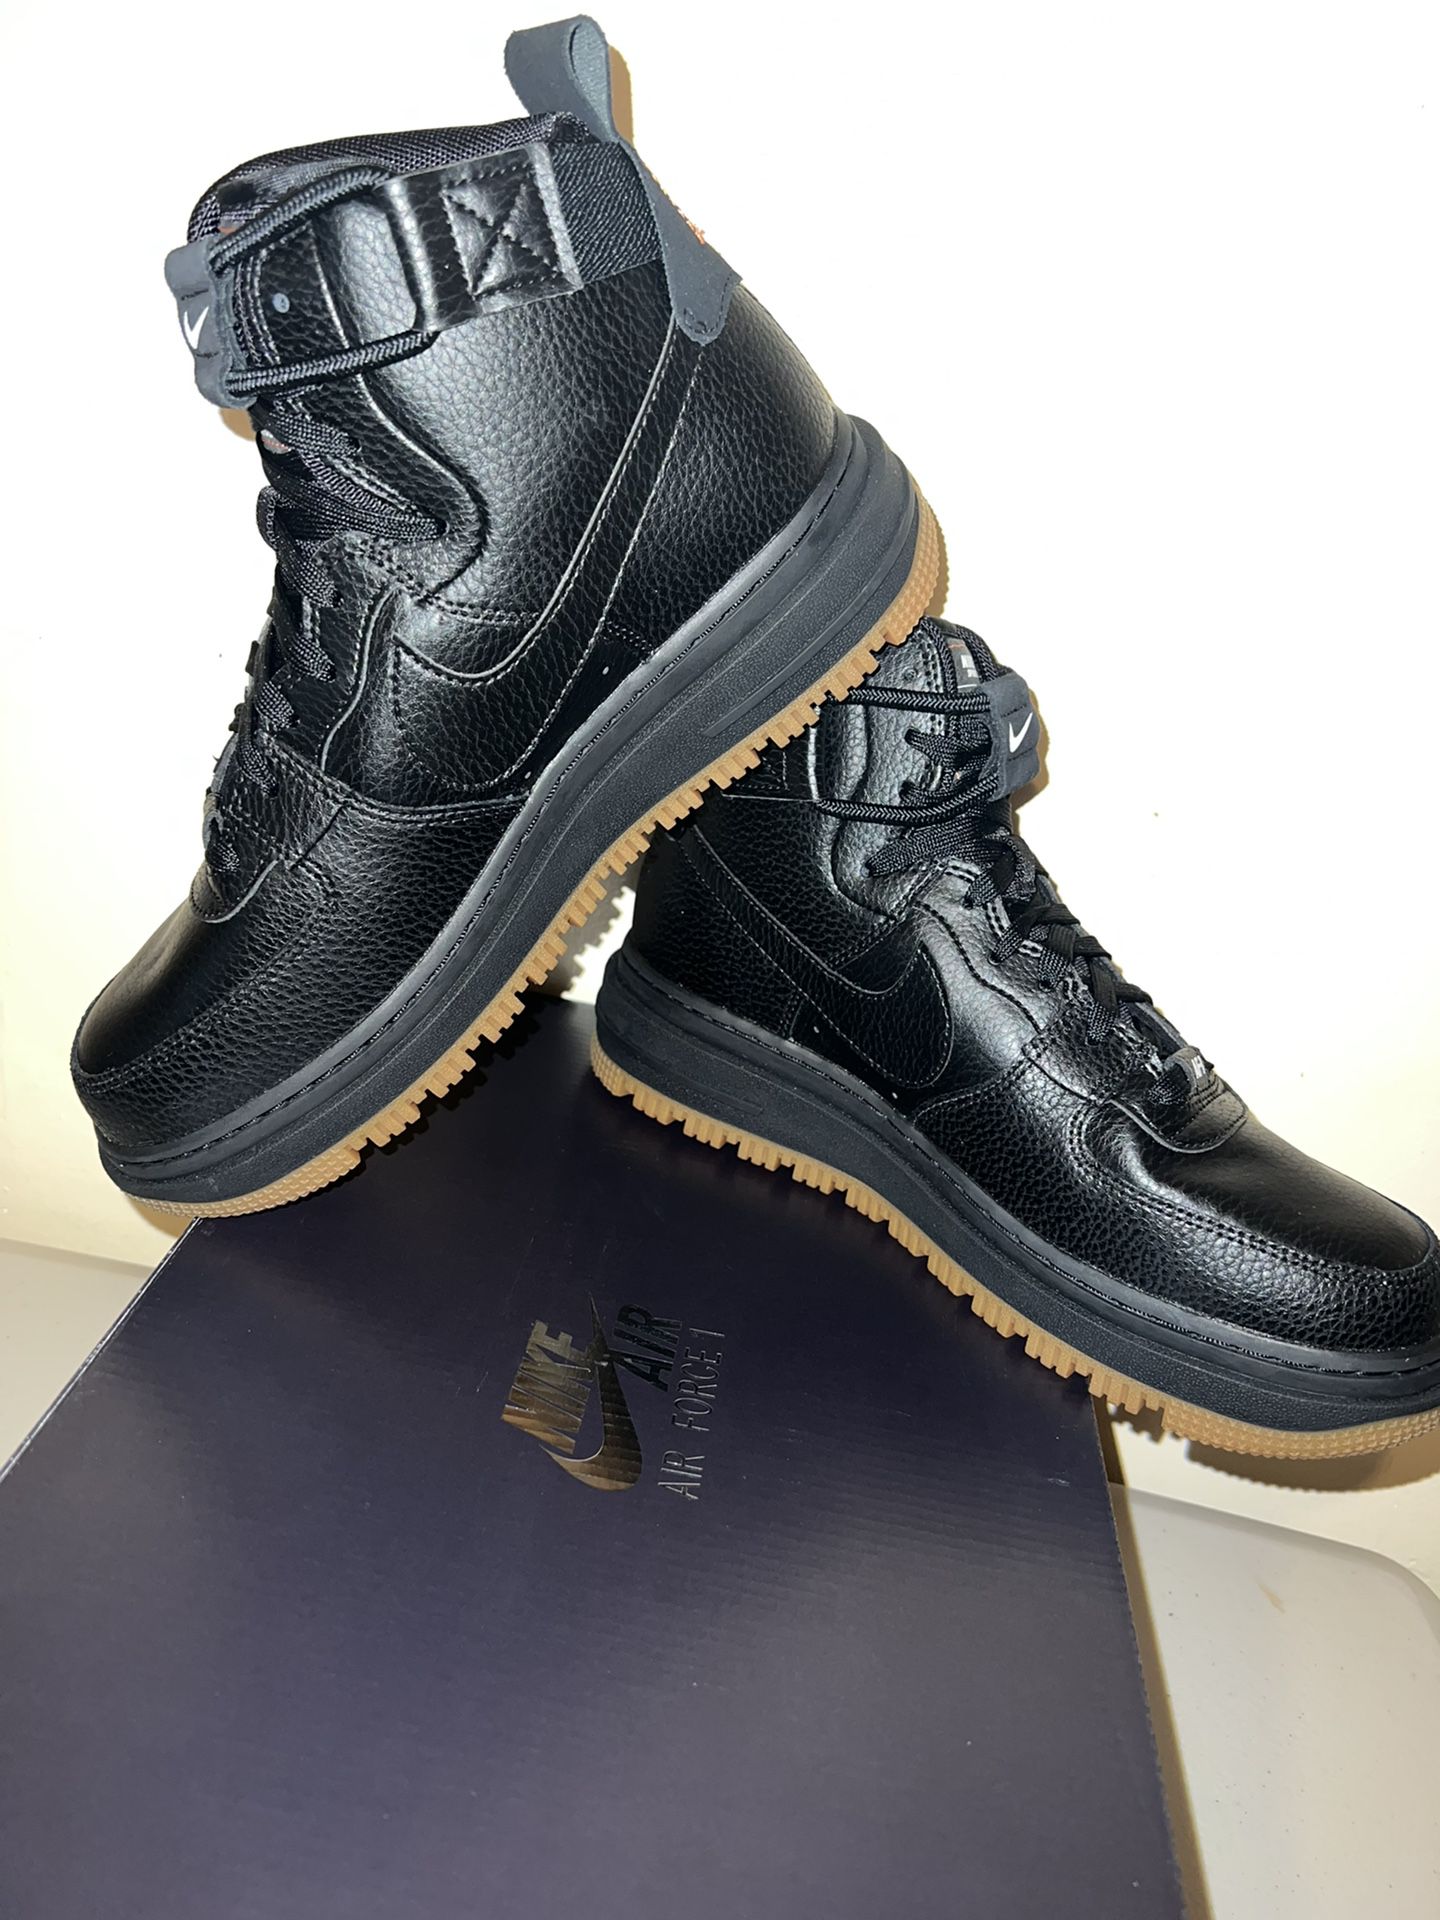  Women’s Air Force One boots 